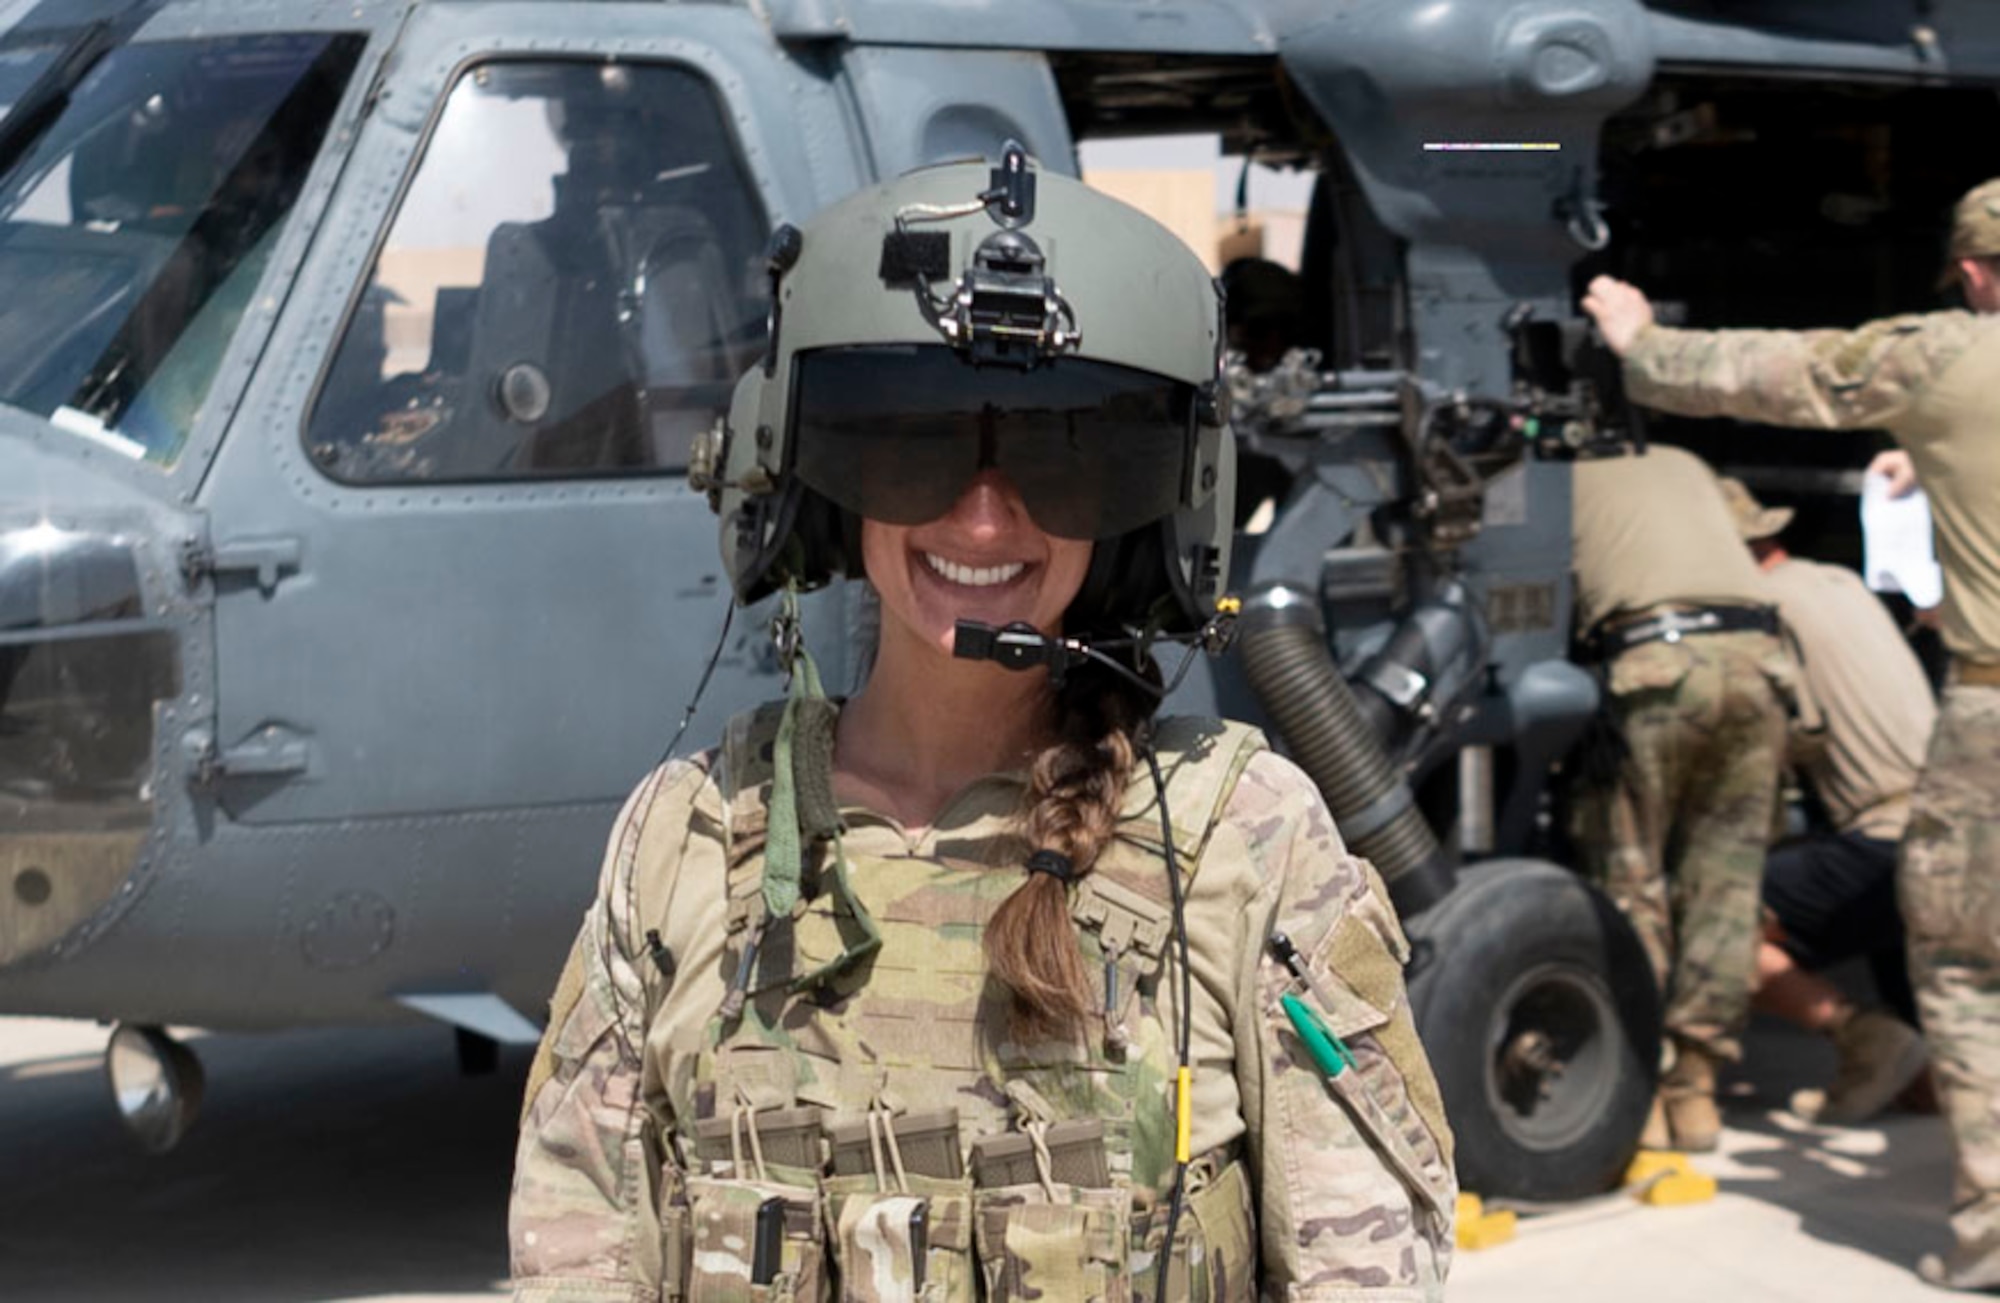 U.S. Air Force Major Grace Gibbens, 46th Expeditionary Rescue Squadron Pilot, flies the HH-60 Pave Hawk around Area Of Responsibility (AOR). The Pave Hawk is used for search and rescue missions which help enable the Air Force’s ability to develop, maintain, and share timely, accurate and relevant mission information across dispersed forces despite adversary attempts to counter act.